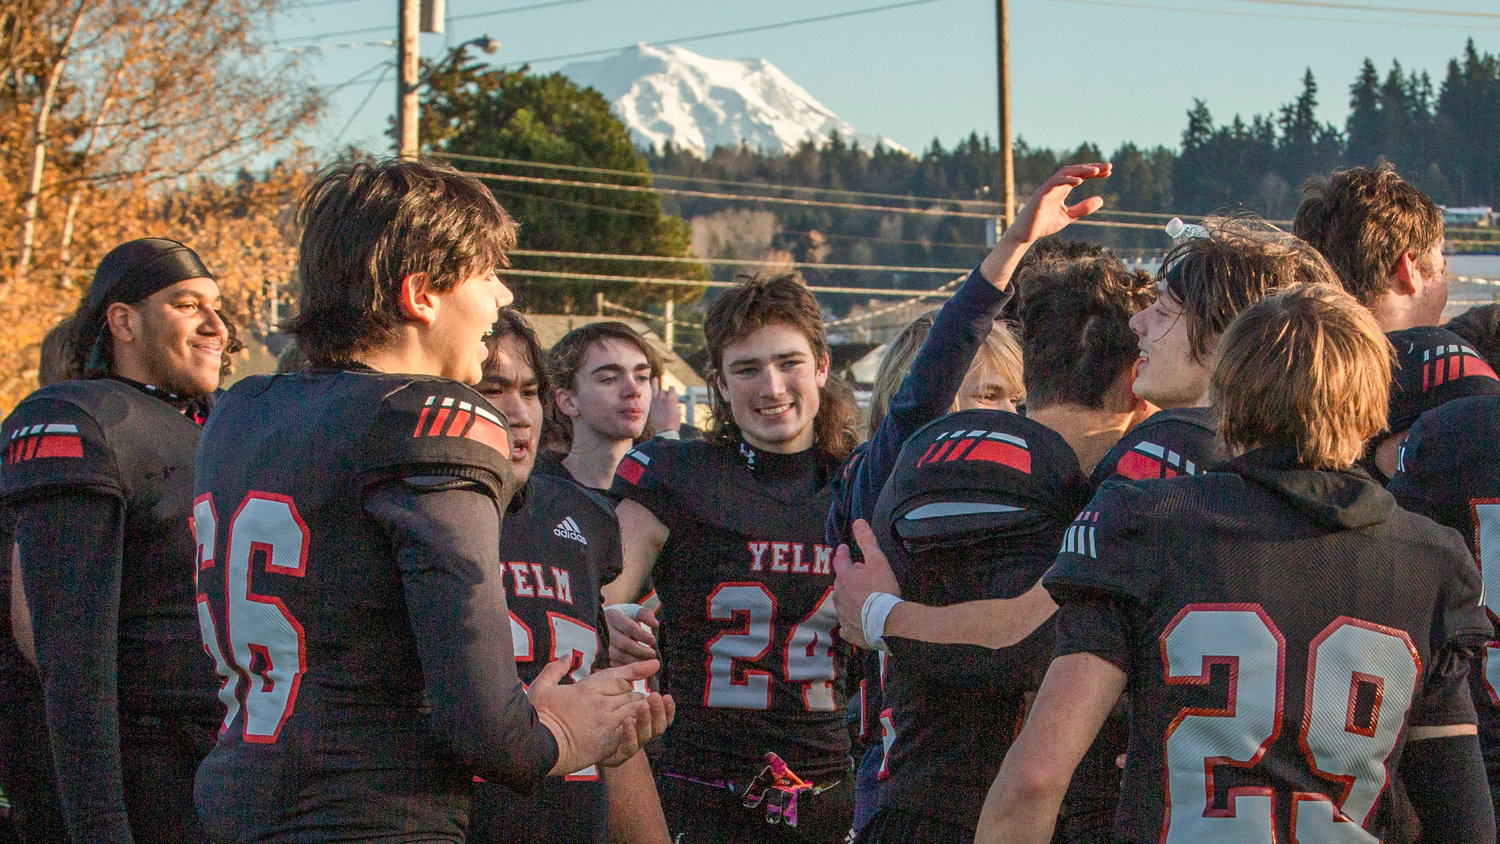 Mount Rainier sets the backdrop for an elated Yelm football team after they won the 3A state championship in Puyallup on Dec. 3.